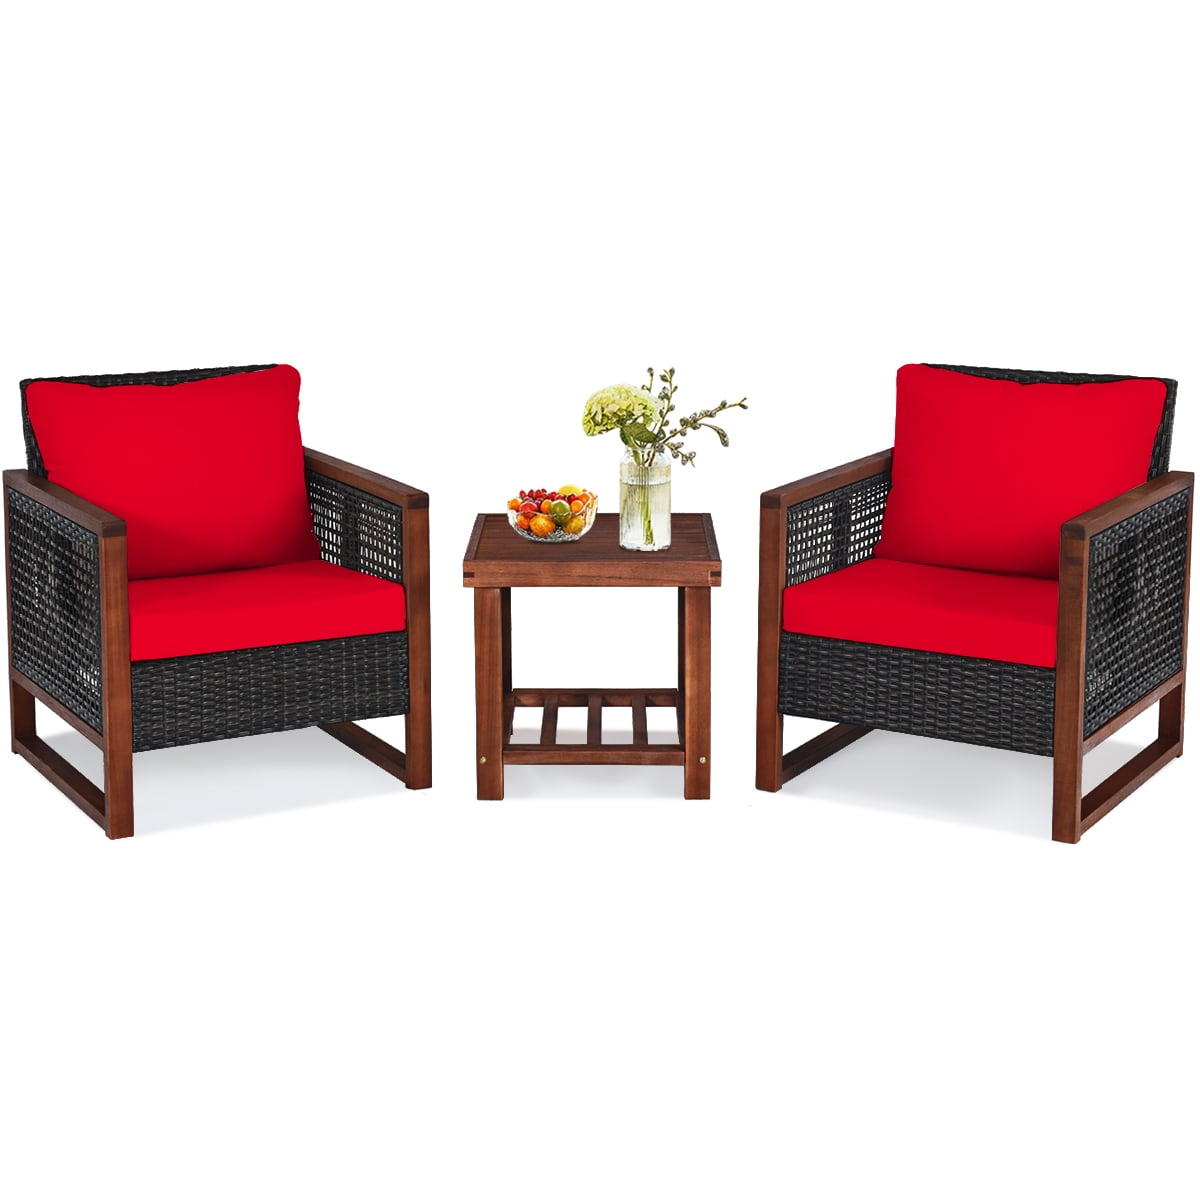 Red Replacement 3pc Cushions Set to fit Rattan Garden Furniture Chairs Sofa